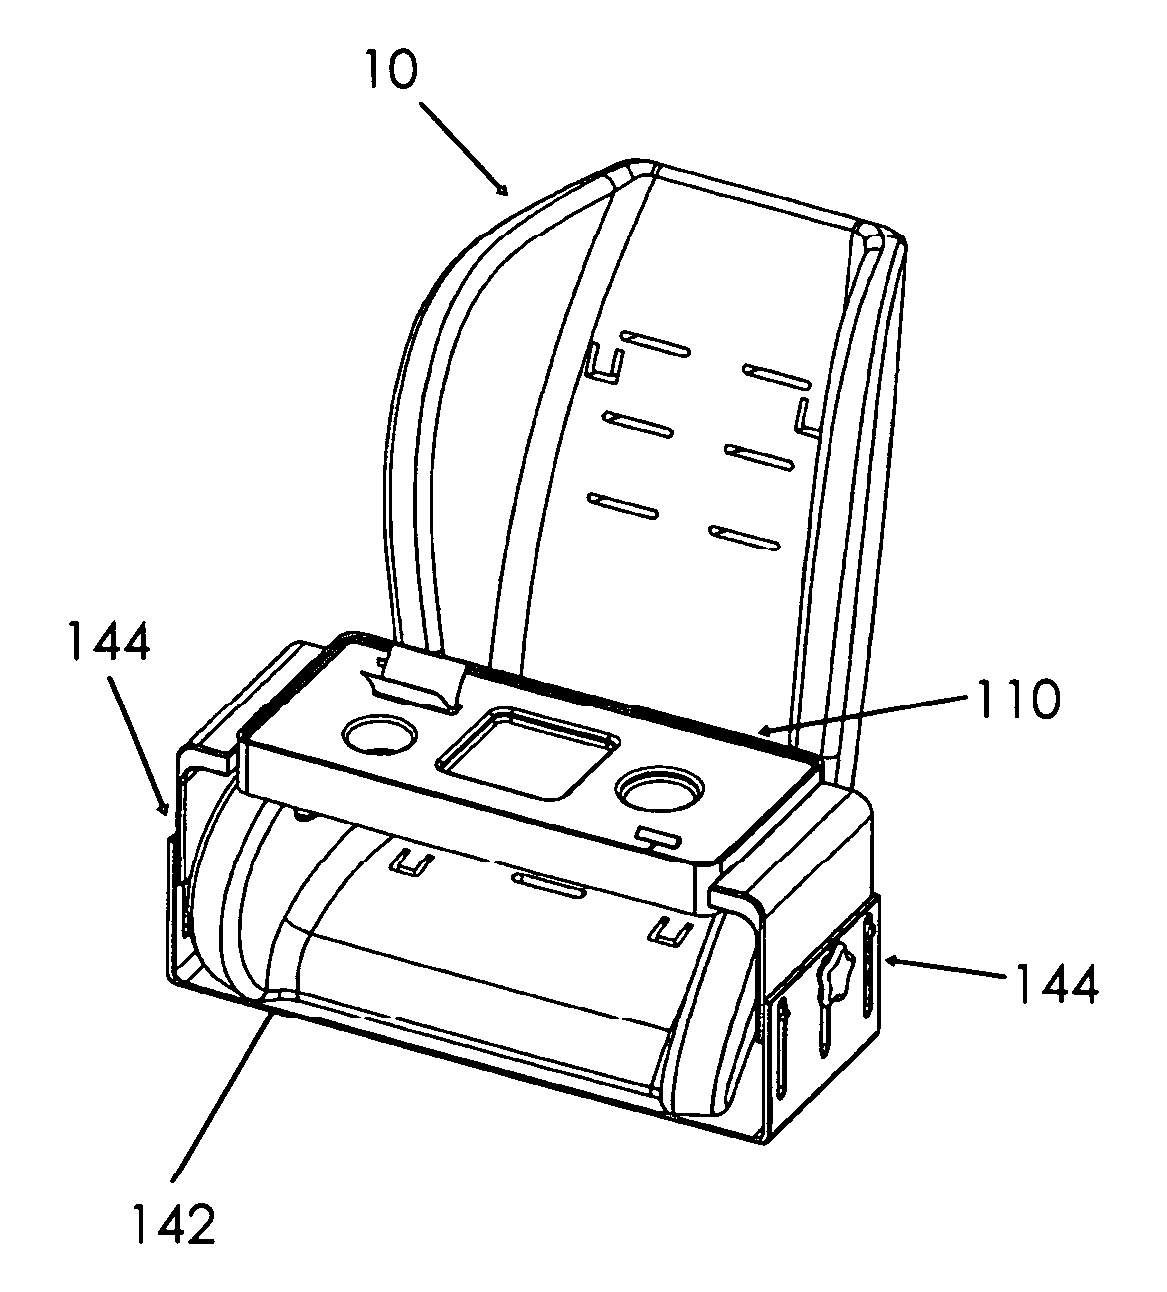 Reversible food and game tray device